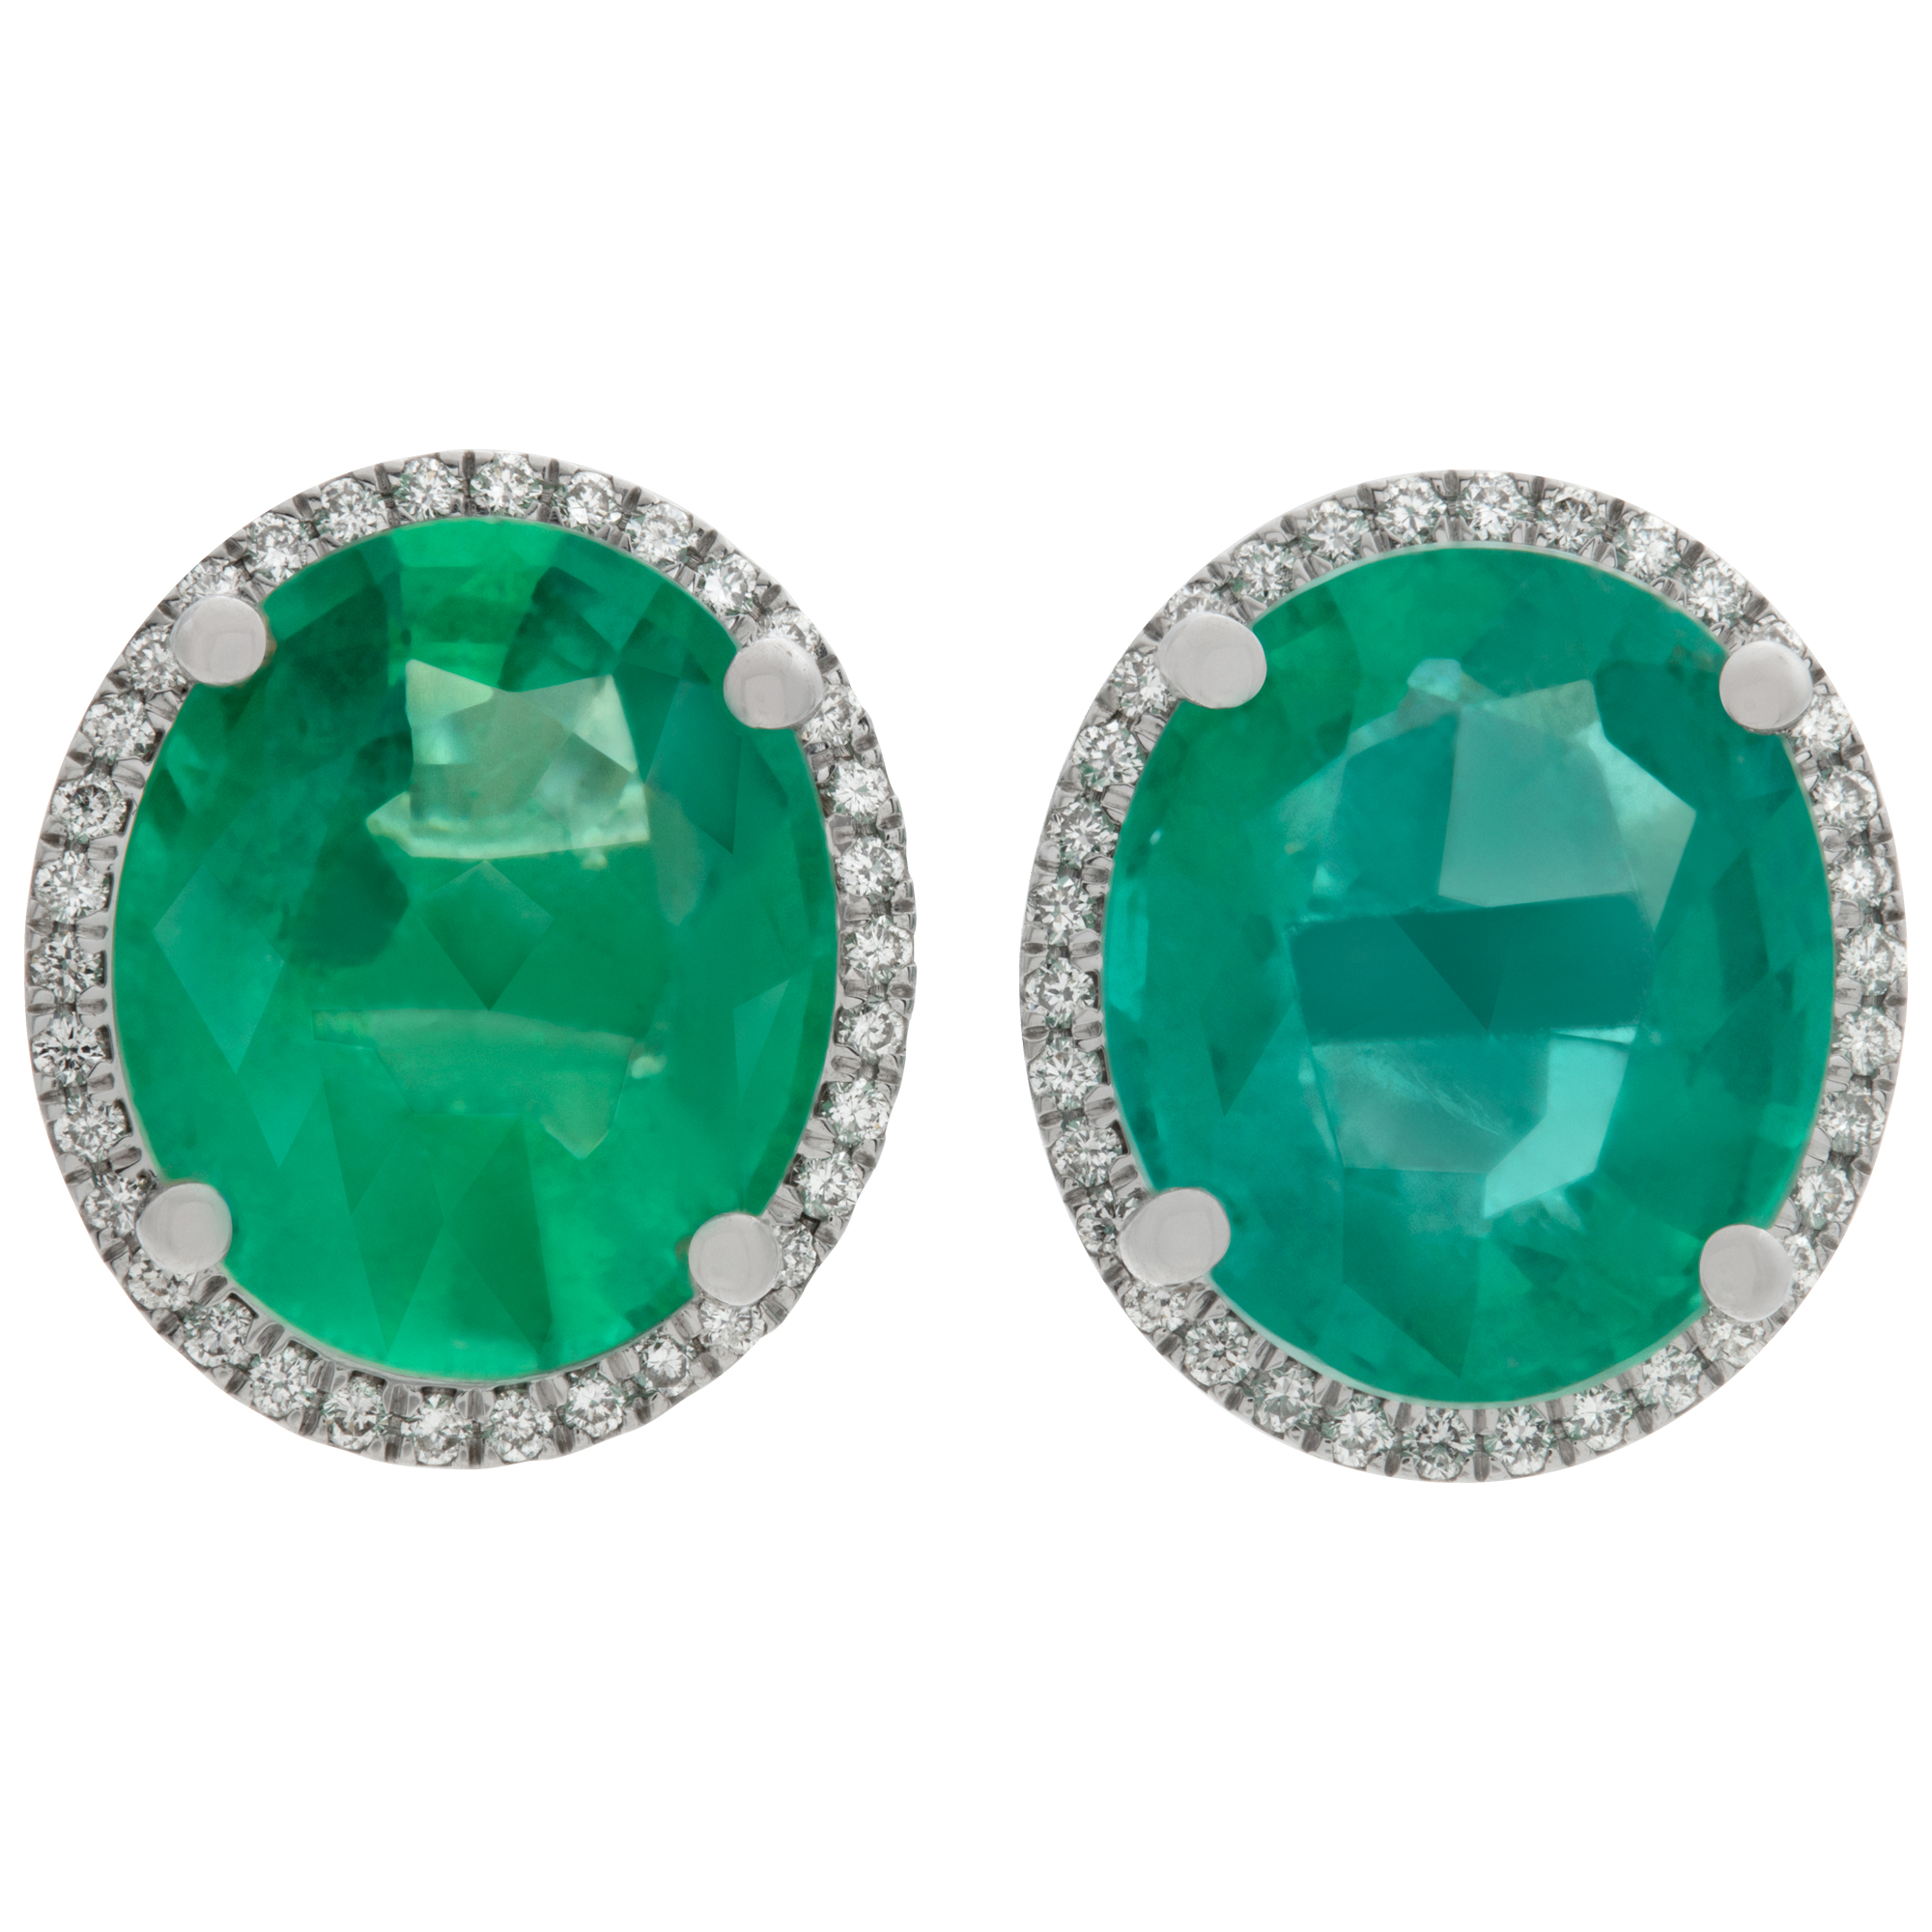 Diamond and emerald stud earrings in 18k white gold (Stones)